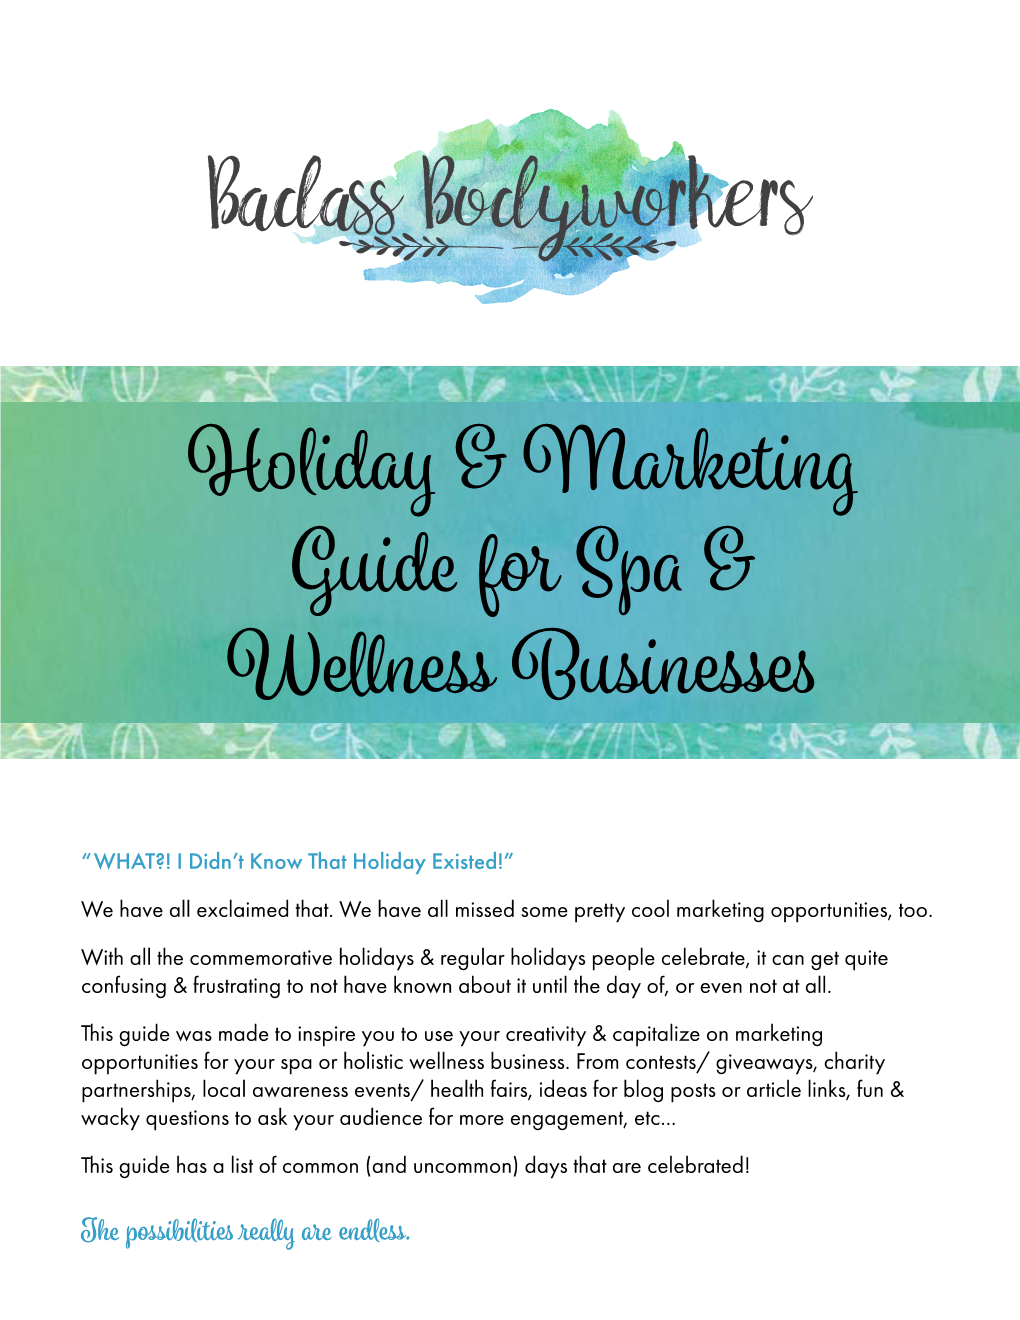 Holiday & Marketing Guide for Spa & Wellness Businesses